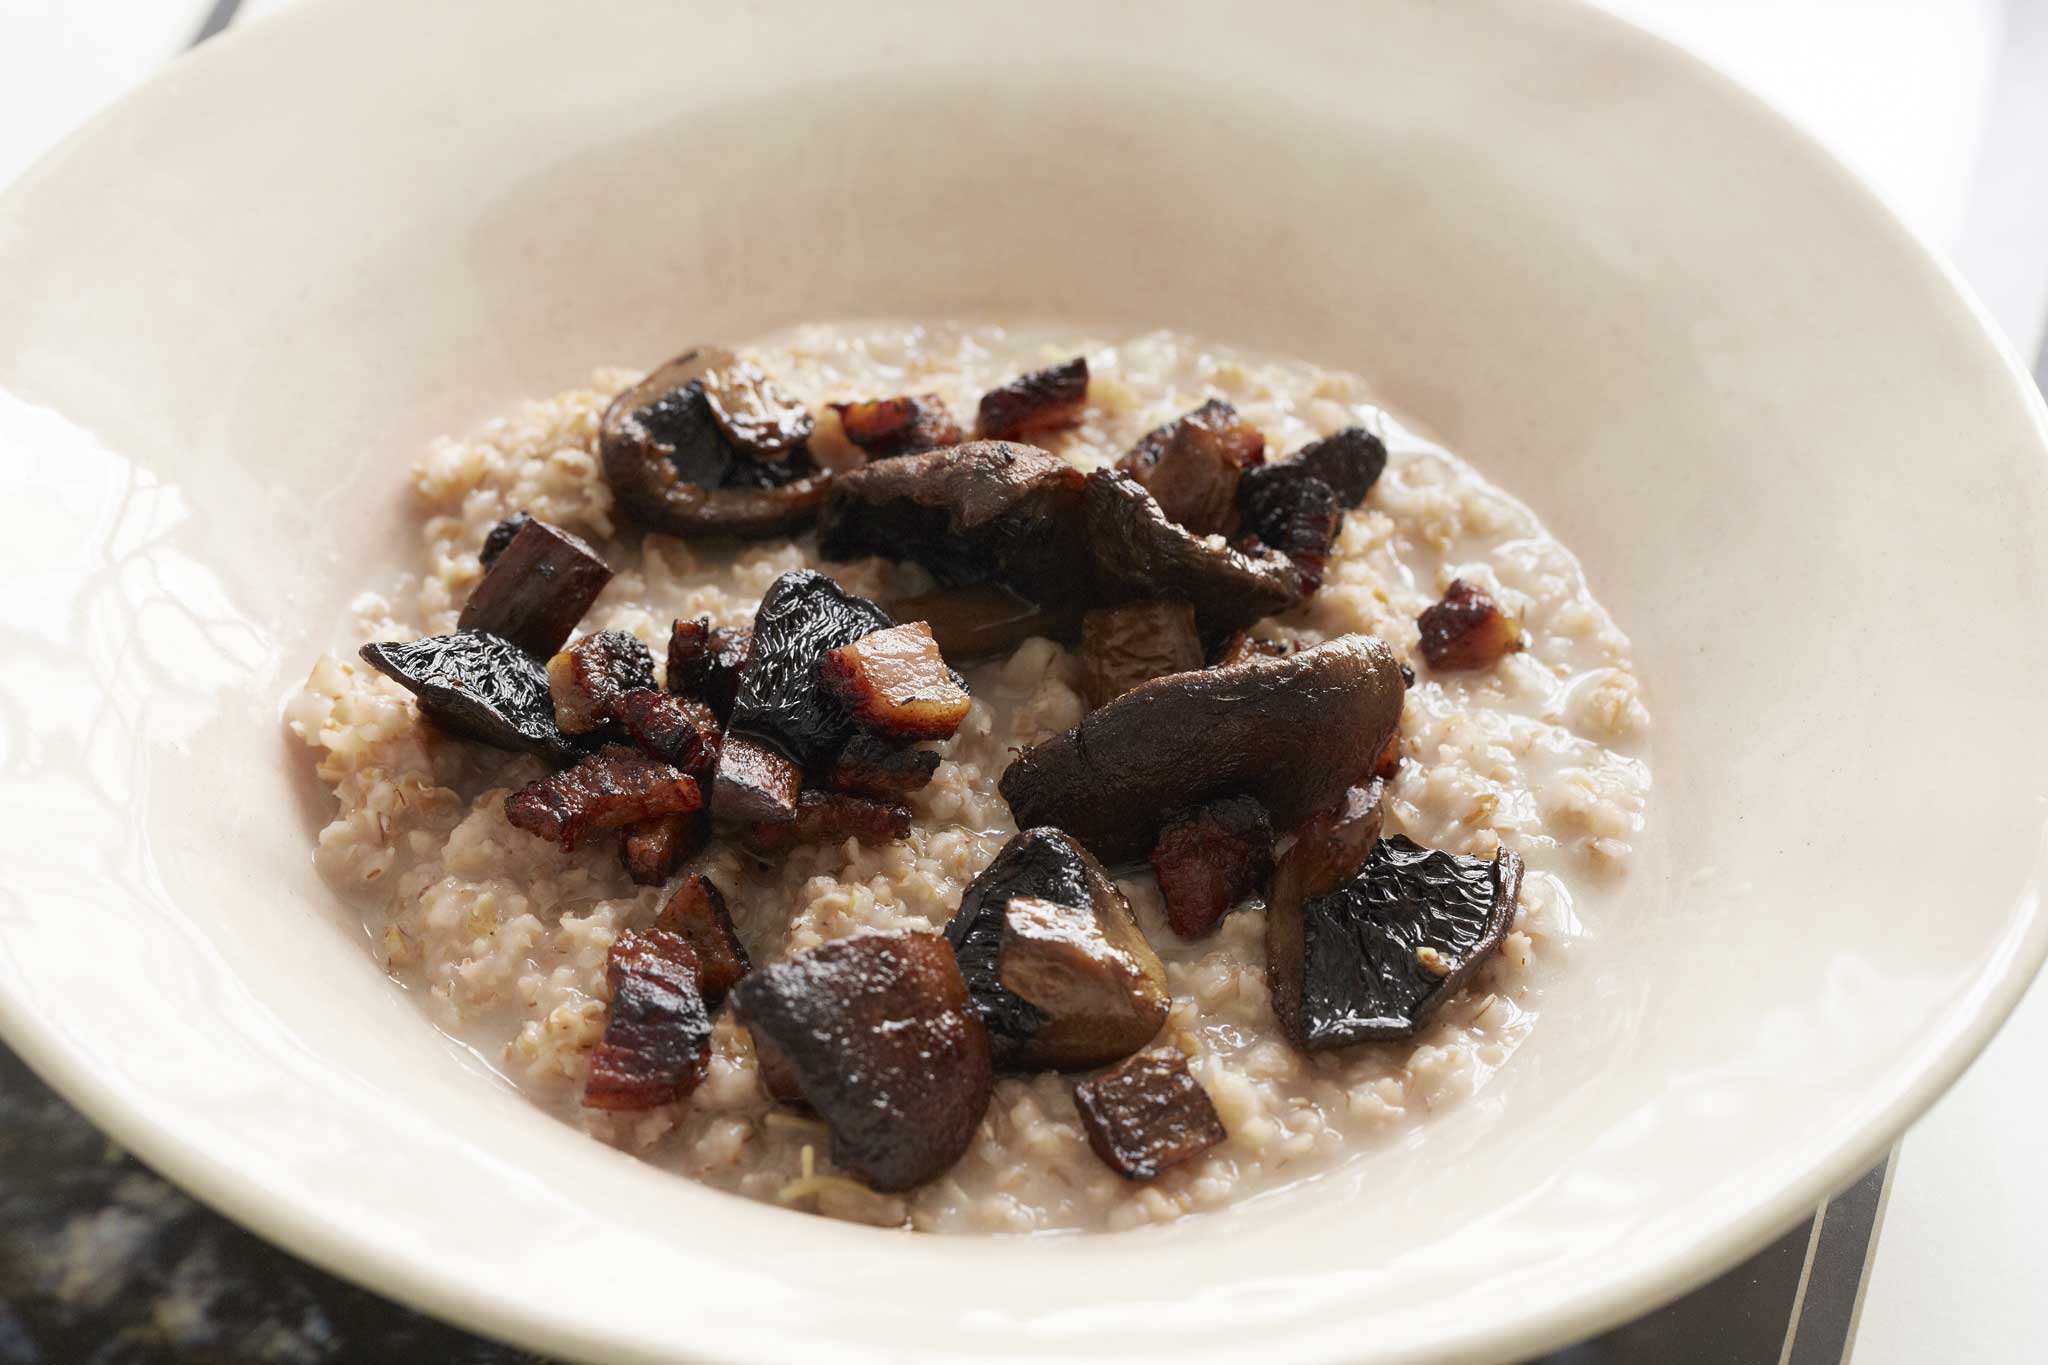 Savoury spelt porridge is a great start to the day